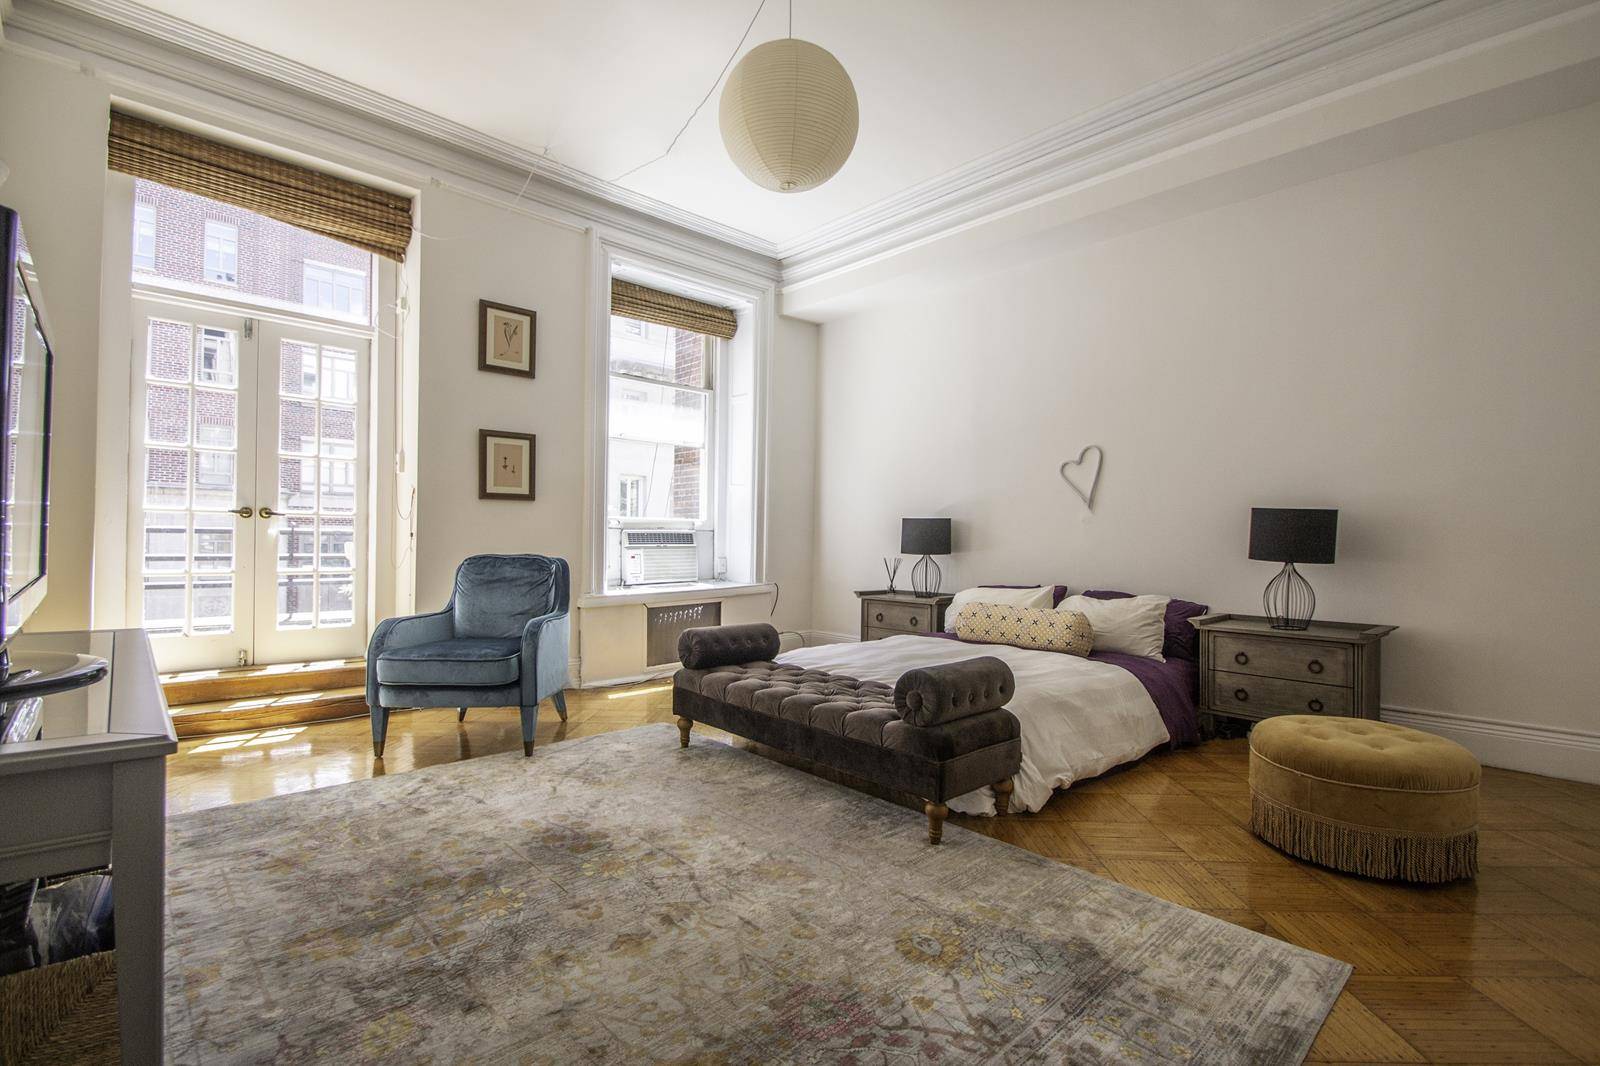 Perfectly situated just off Fifth Avenue is this bright and lofty studio on the quaint tree lined block of East 62nd Street.